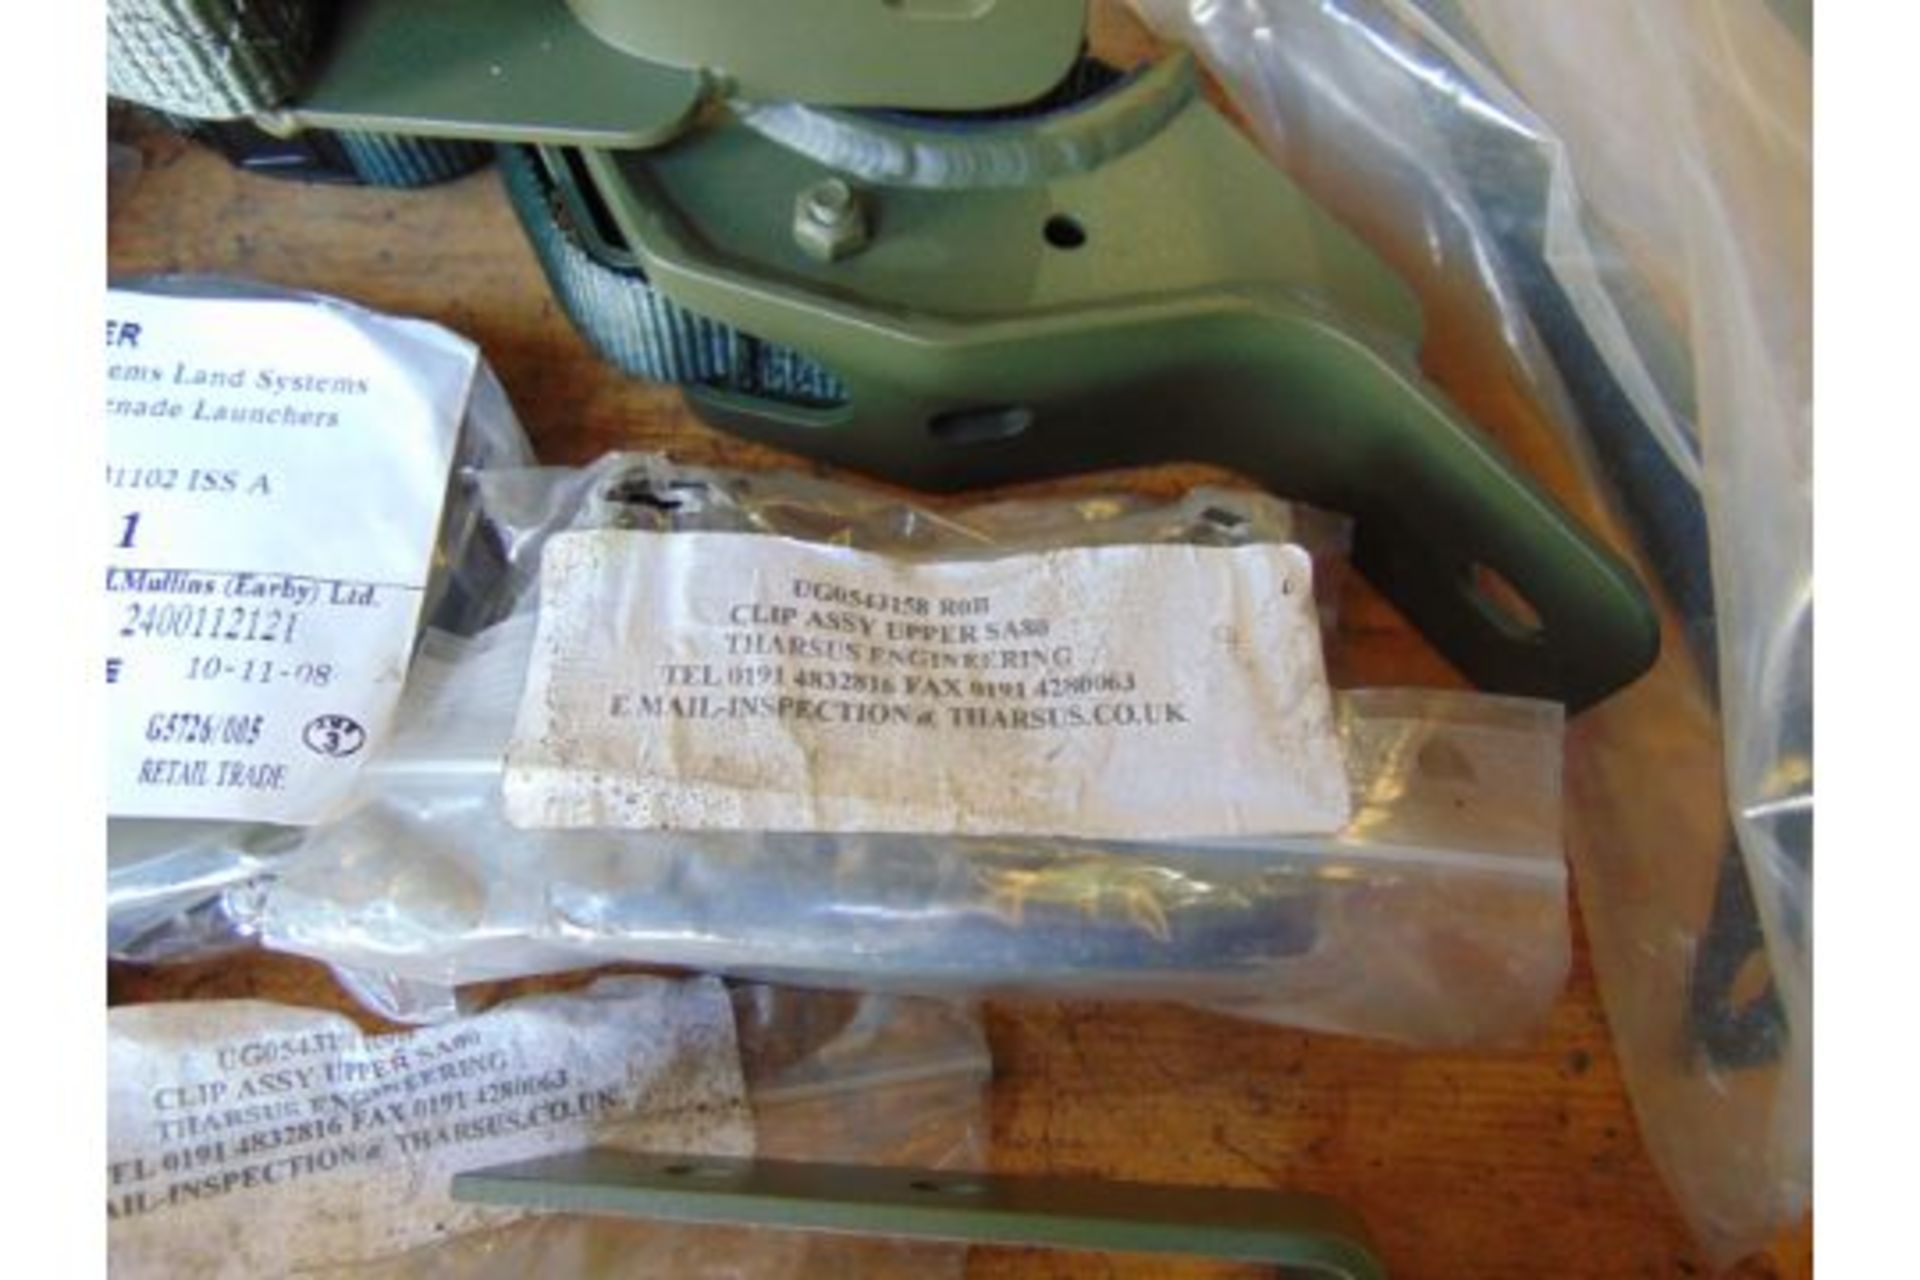 New Unissued WIMIK SA 80 Clips Launcher Covers, Stowage Straps, Barrel Clamps etc - Image 6 of 8